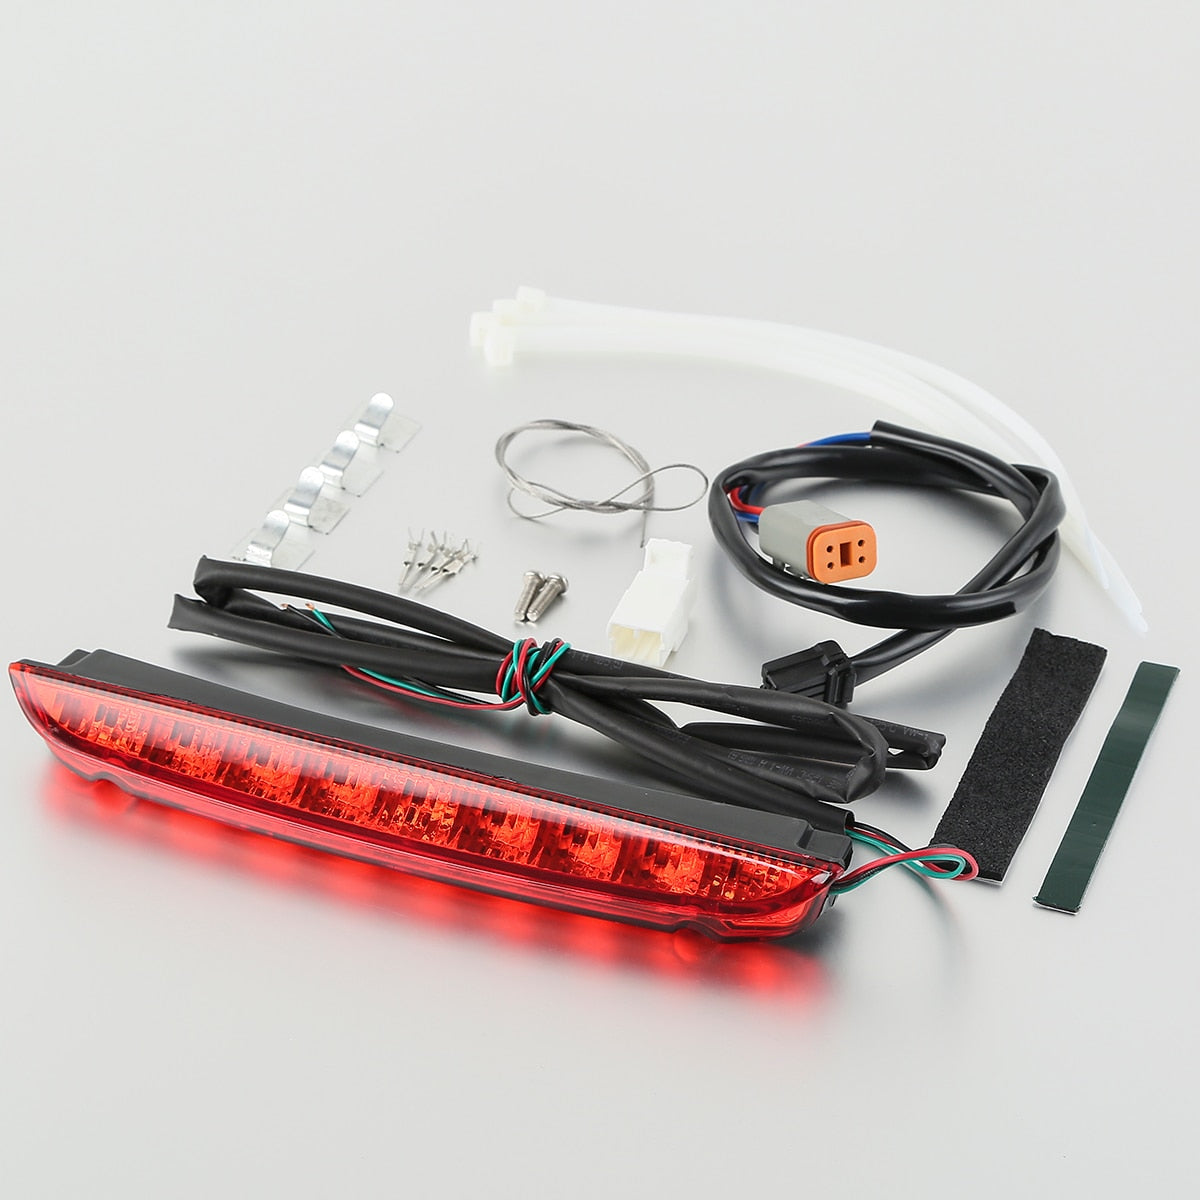 Voodoo Cycle House Luggage Rack LED Tail Light For Harley-Davidson Electra Street Road Glide Road King 1993-2013